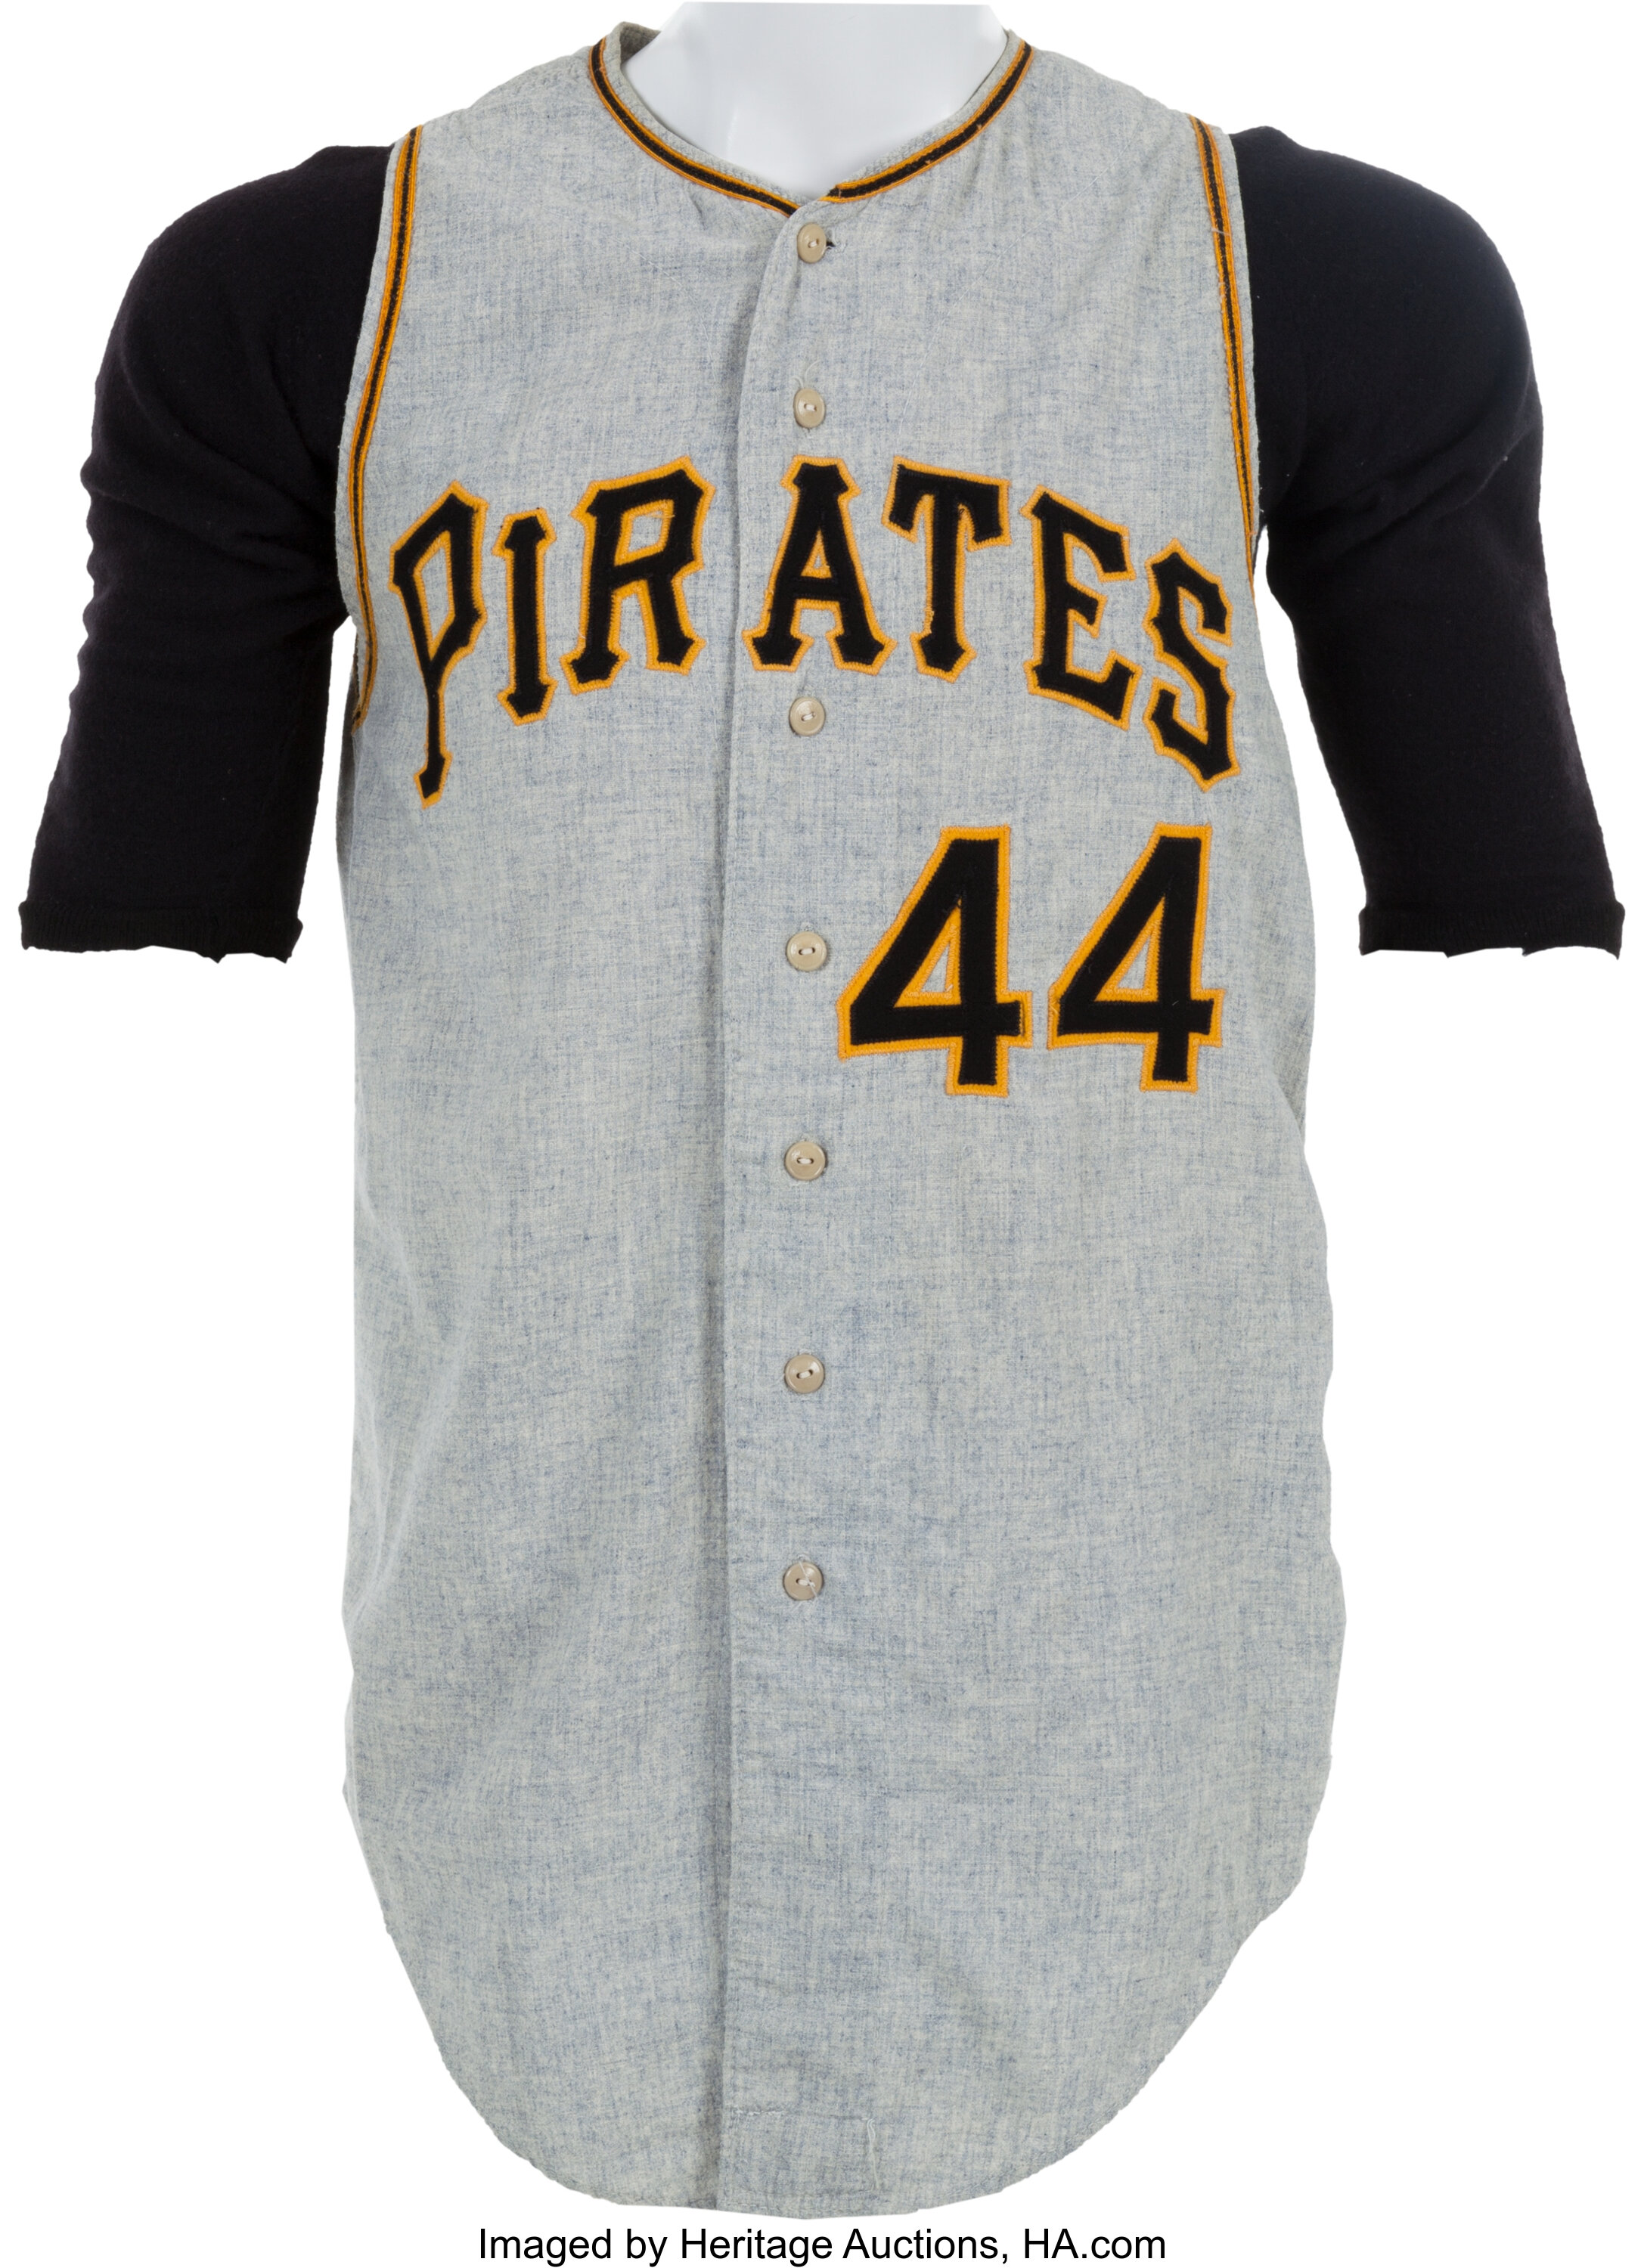 2006-13 Pittsburgh Pirates #38 Game Issued Cream Jersey Homestead